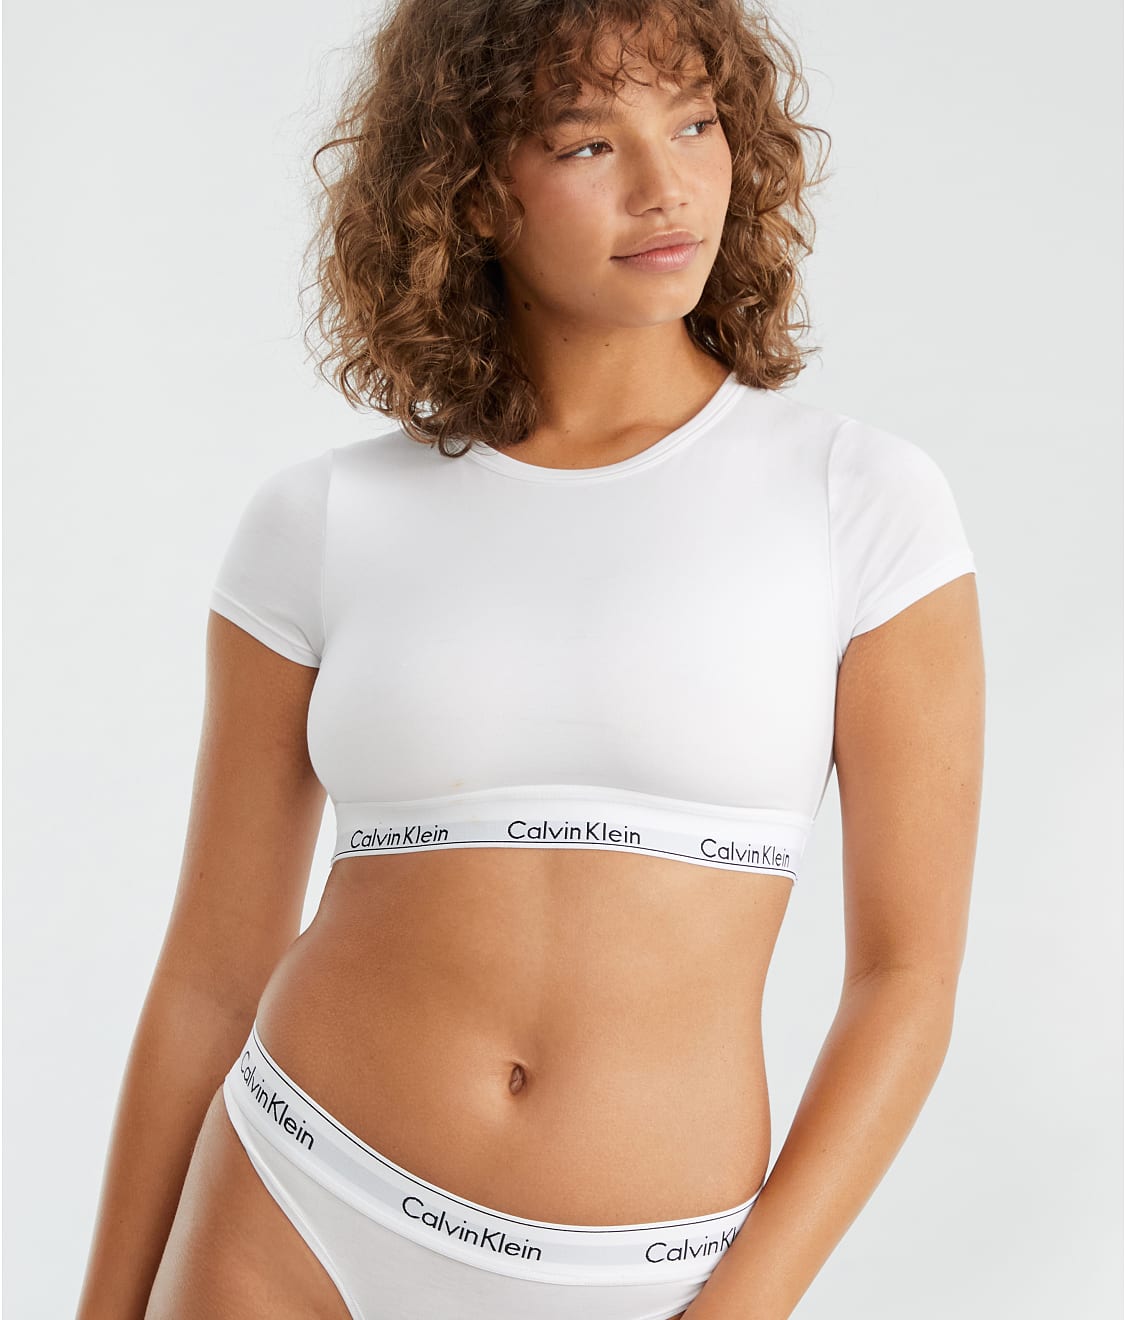 lave mad afkom Stearinlys Calvin Klein Modern Cotton T-shirt Bralette & Reviews | Bare Necessities  (Style QF7213)